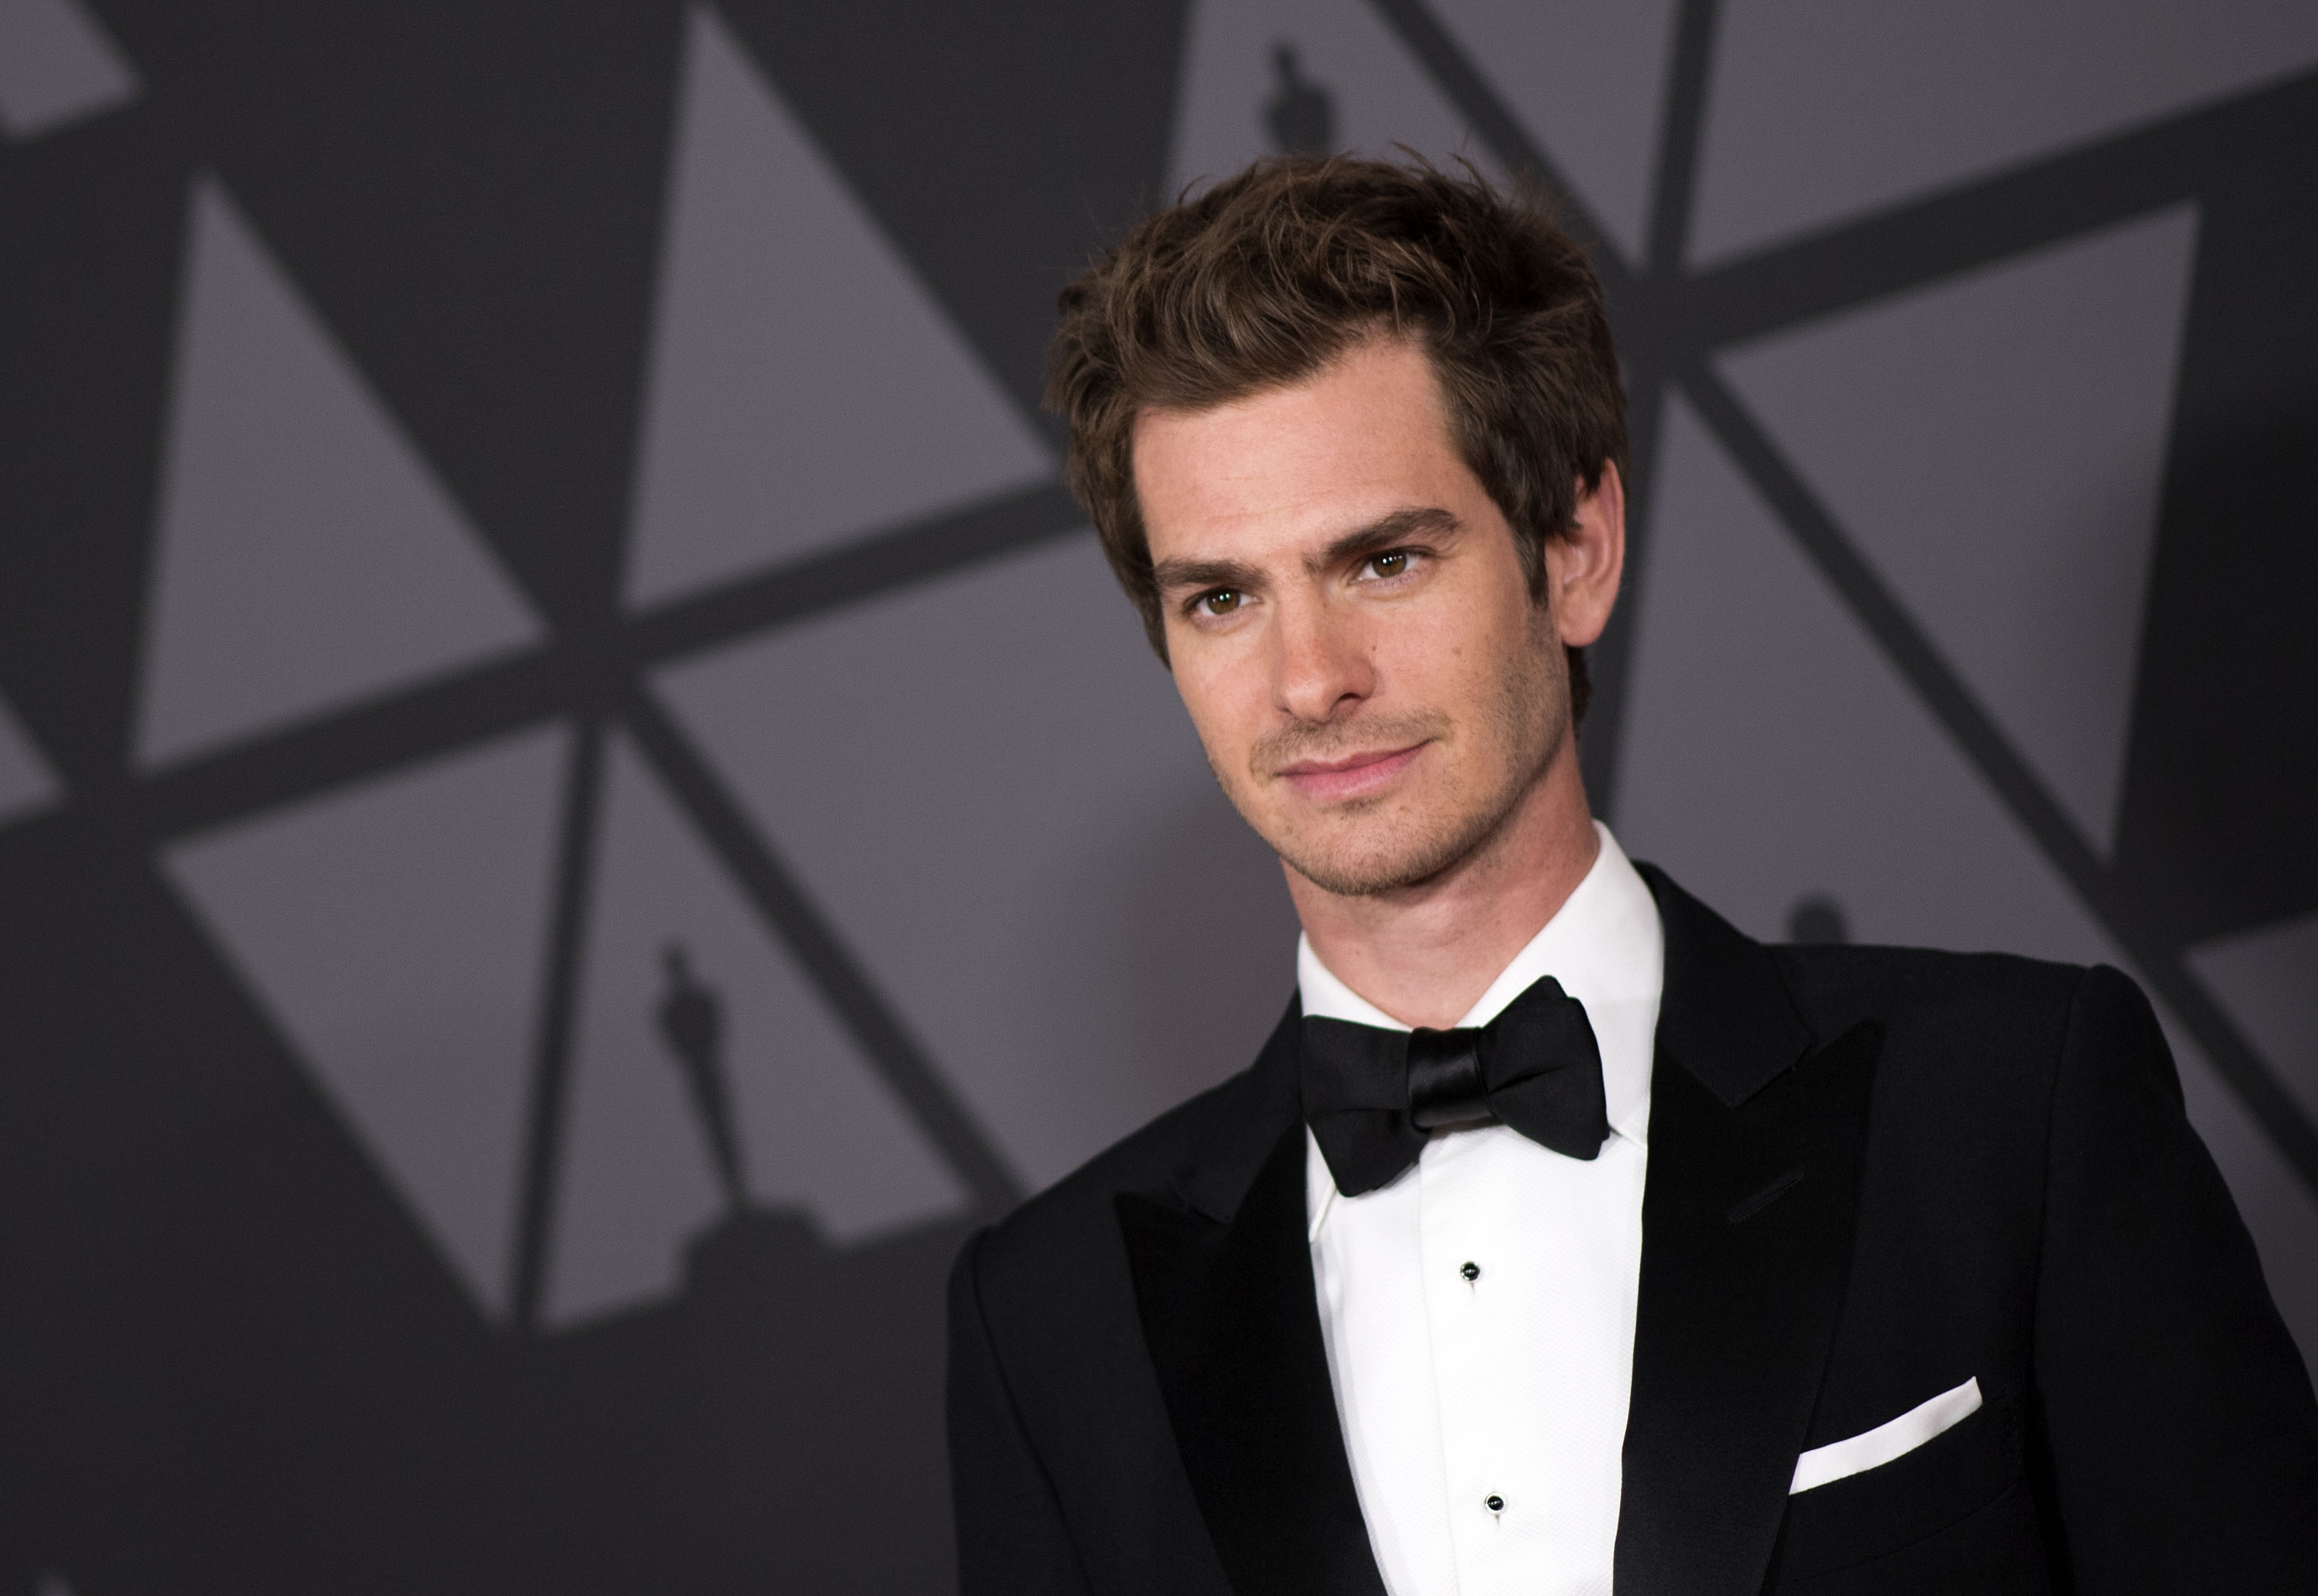 'Spider-Man: No Way Home' star Andrew Garfield wears a black tux with a black bow tie.